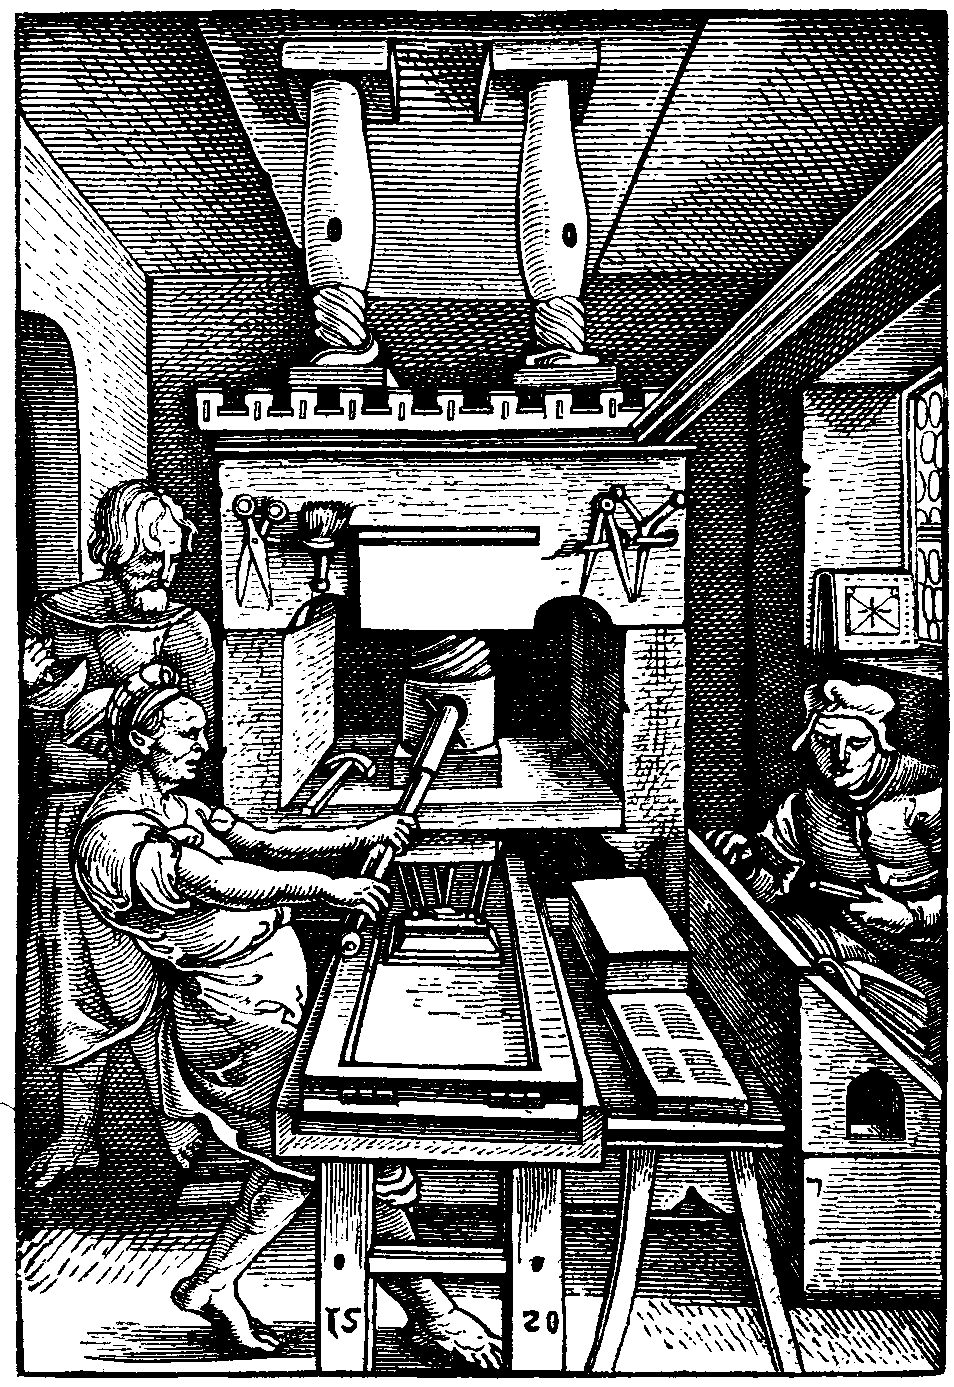 Johann Gutenberg and the Invention of the Printing Press